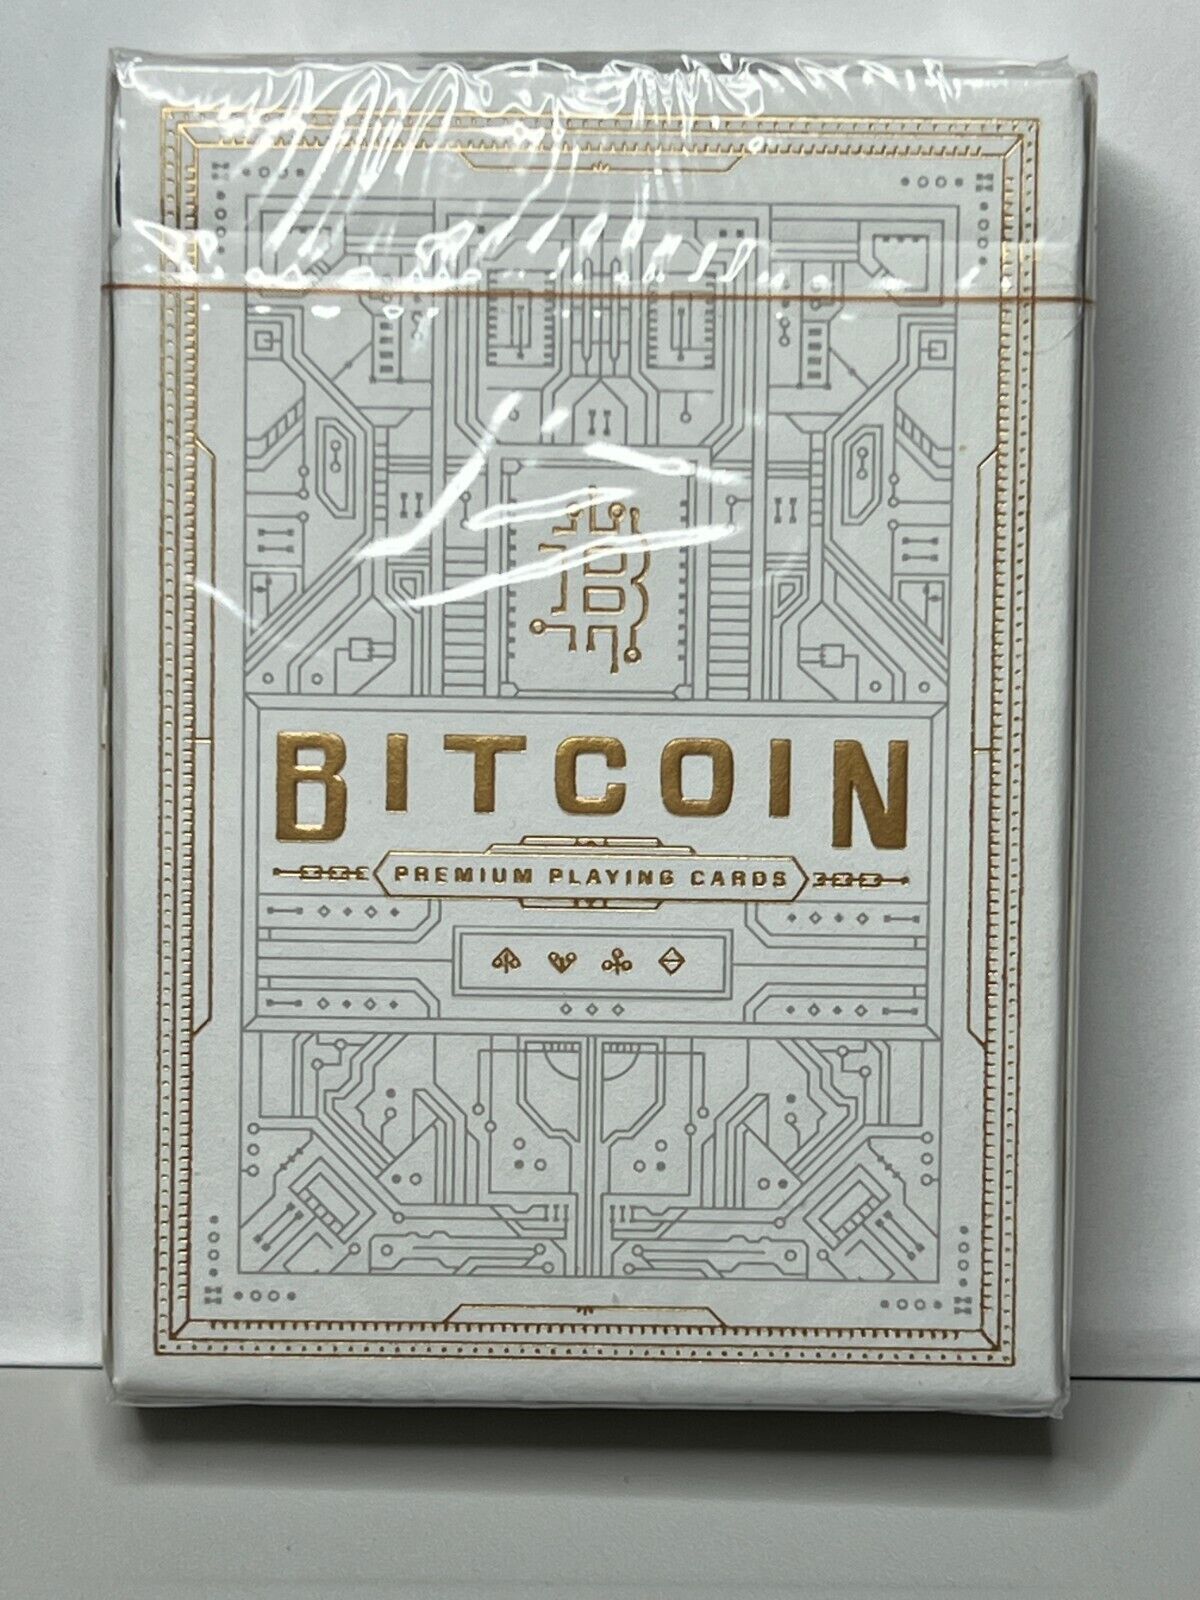 Bitcoin Limited Edition (White) Playing Cards - Numbered 1561 of 2100